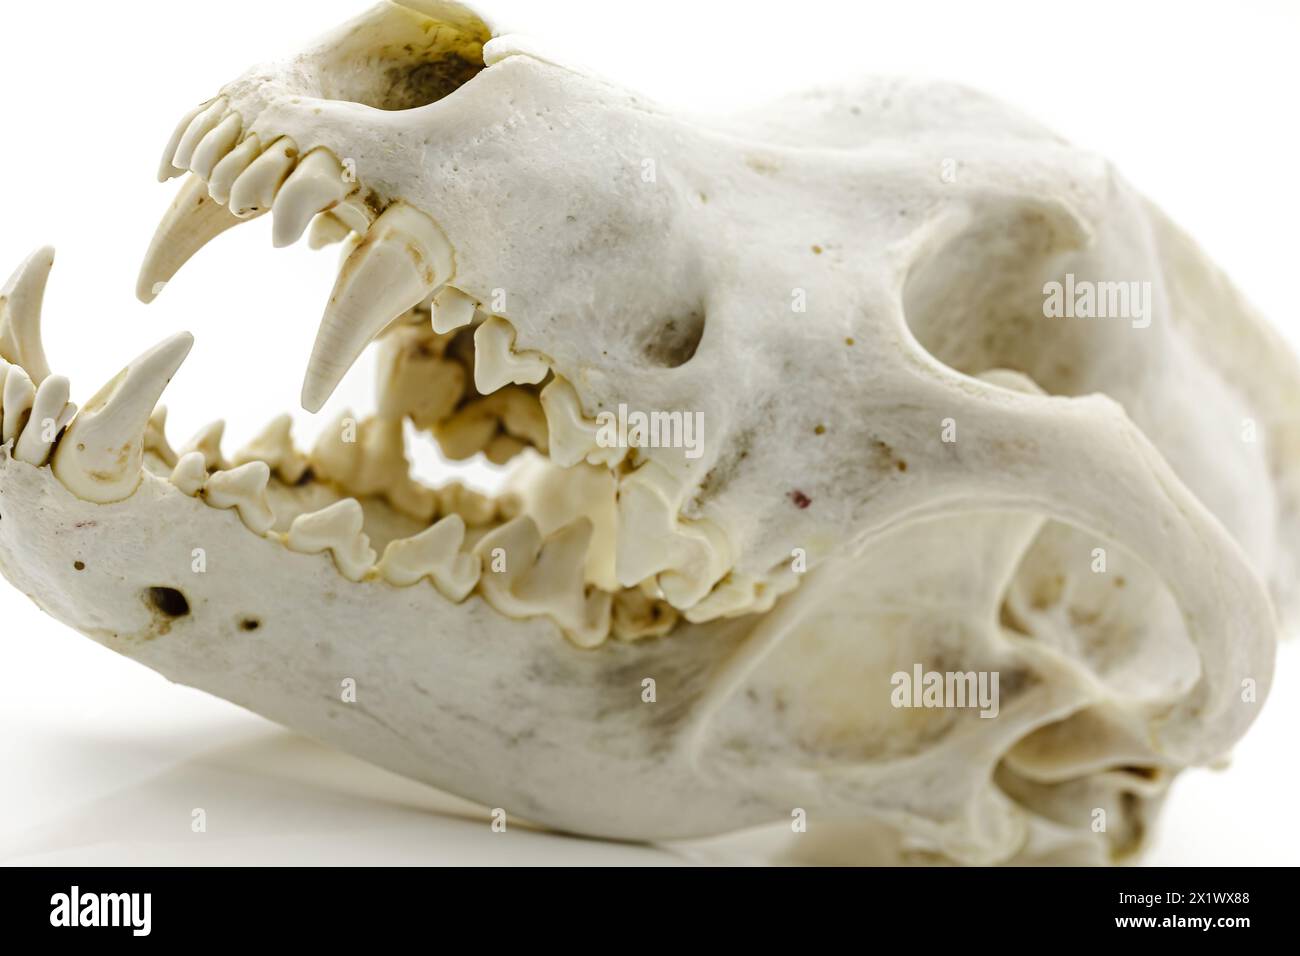 Trophy skull of an adult wolf on a white background. Selective focus with shallow depth of field. Stock Photo